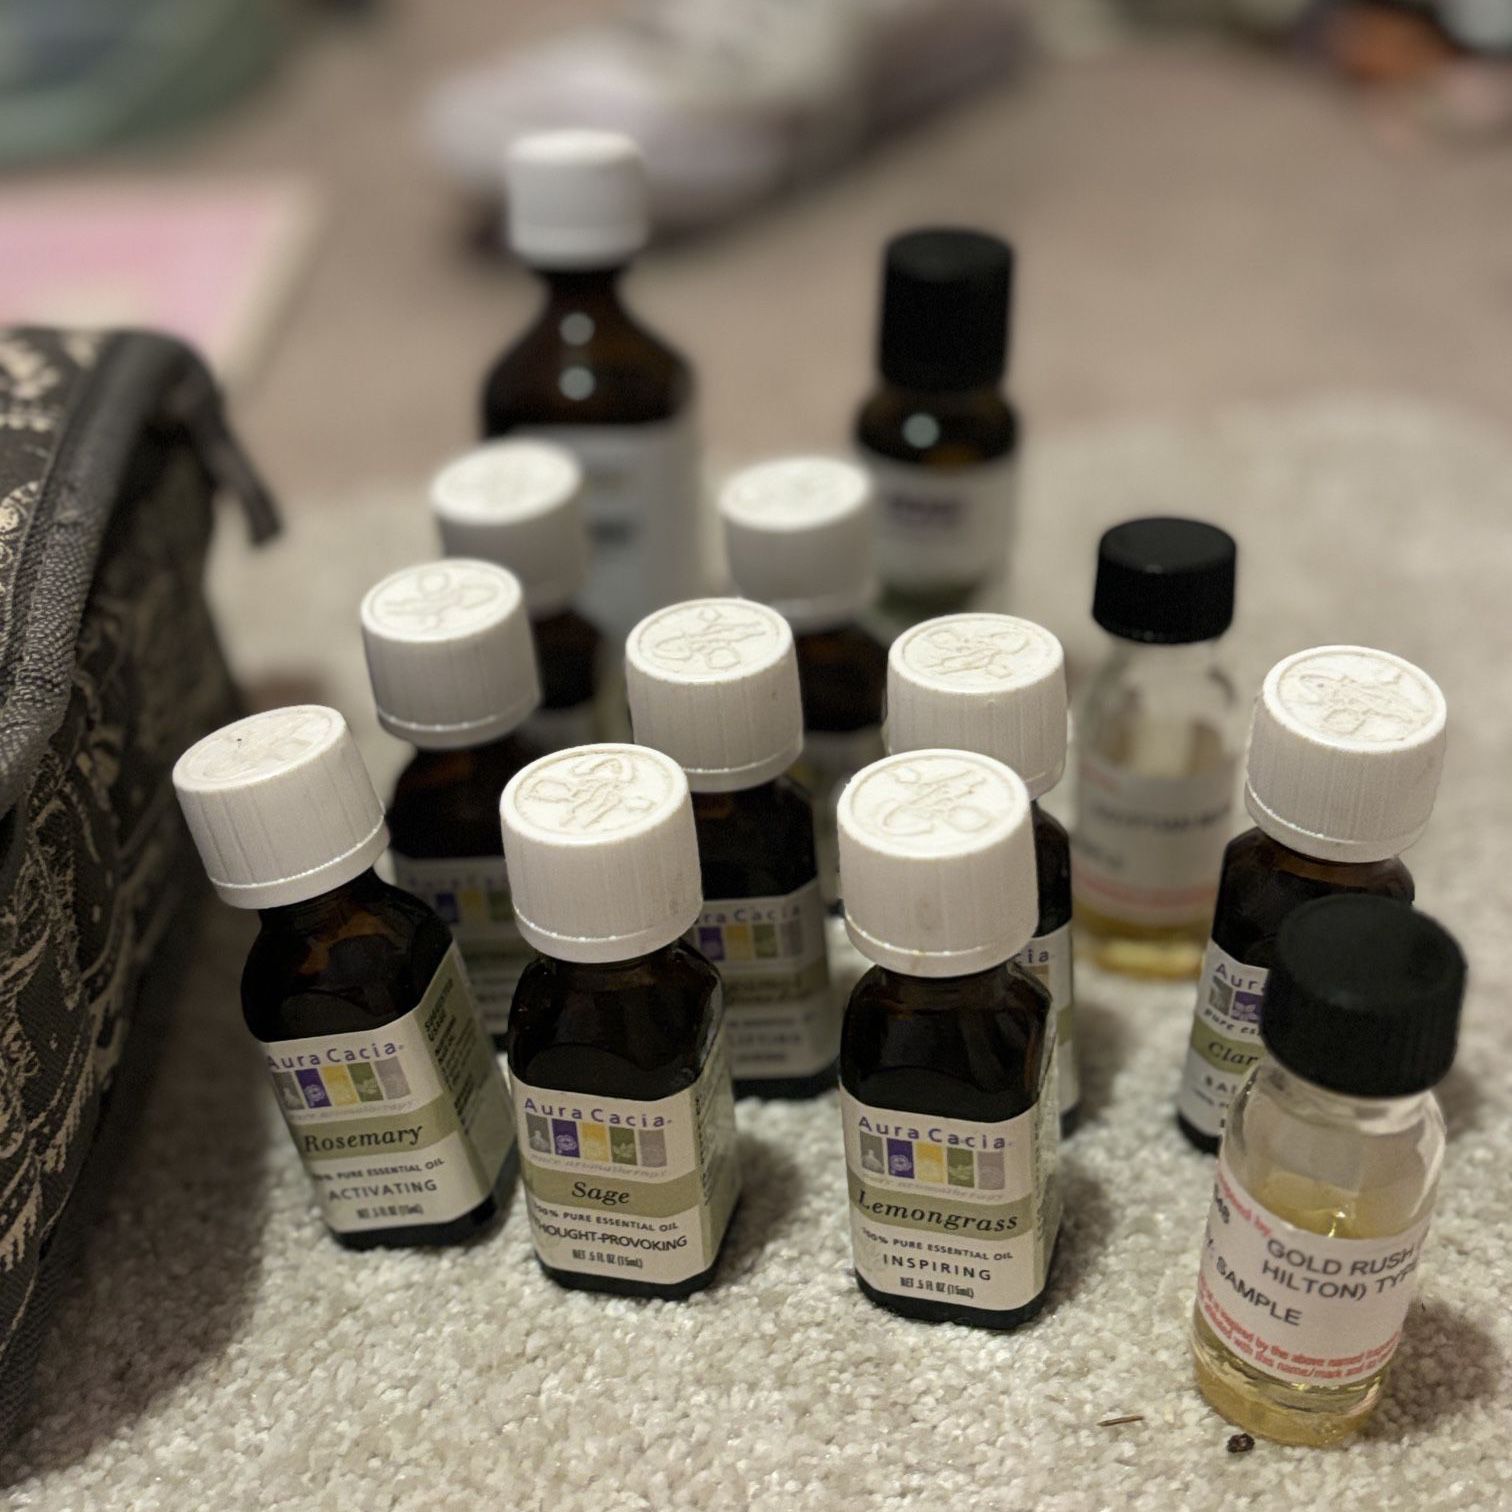 Essential Oils I Believe 15 I Will Count With Carrying 